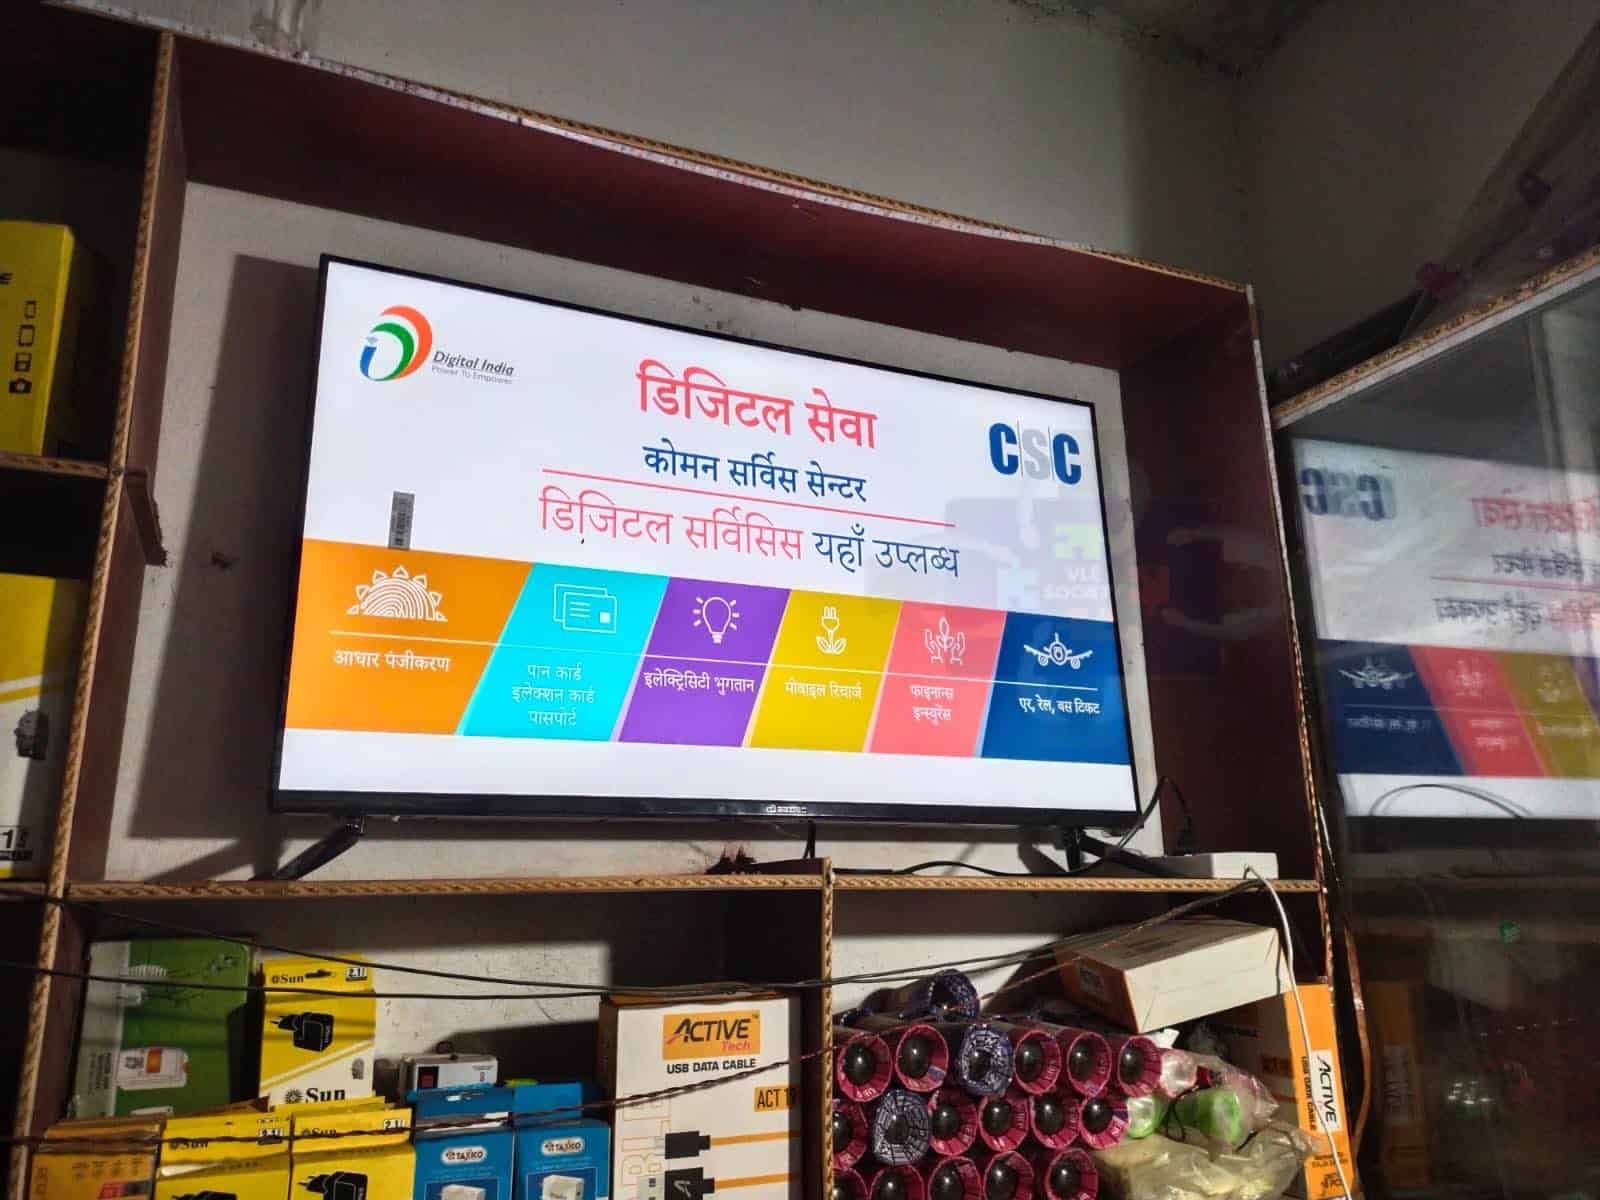 csc evigyapan lcd project vle society